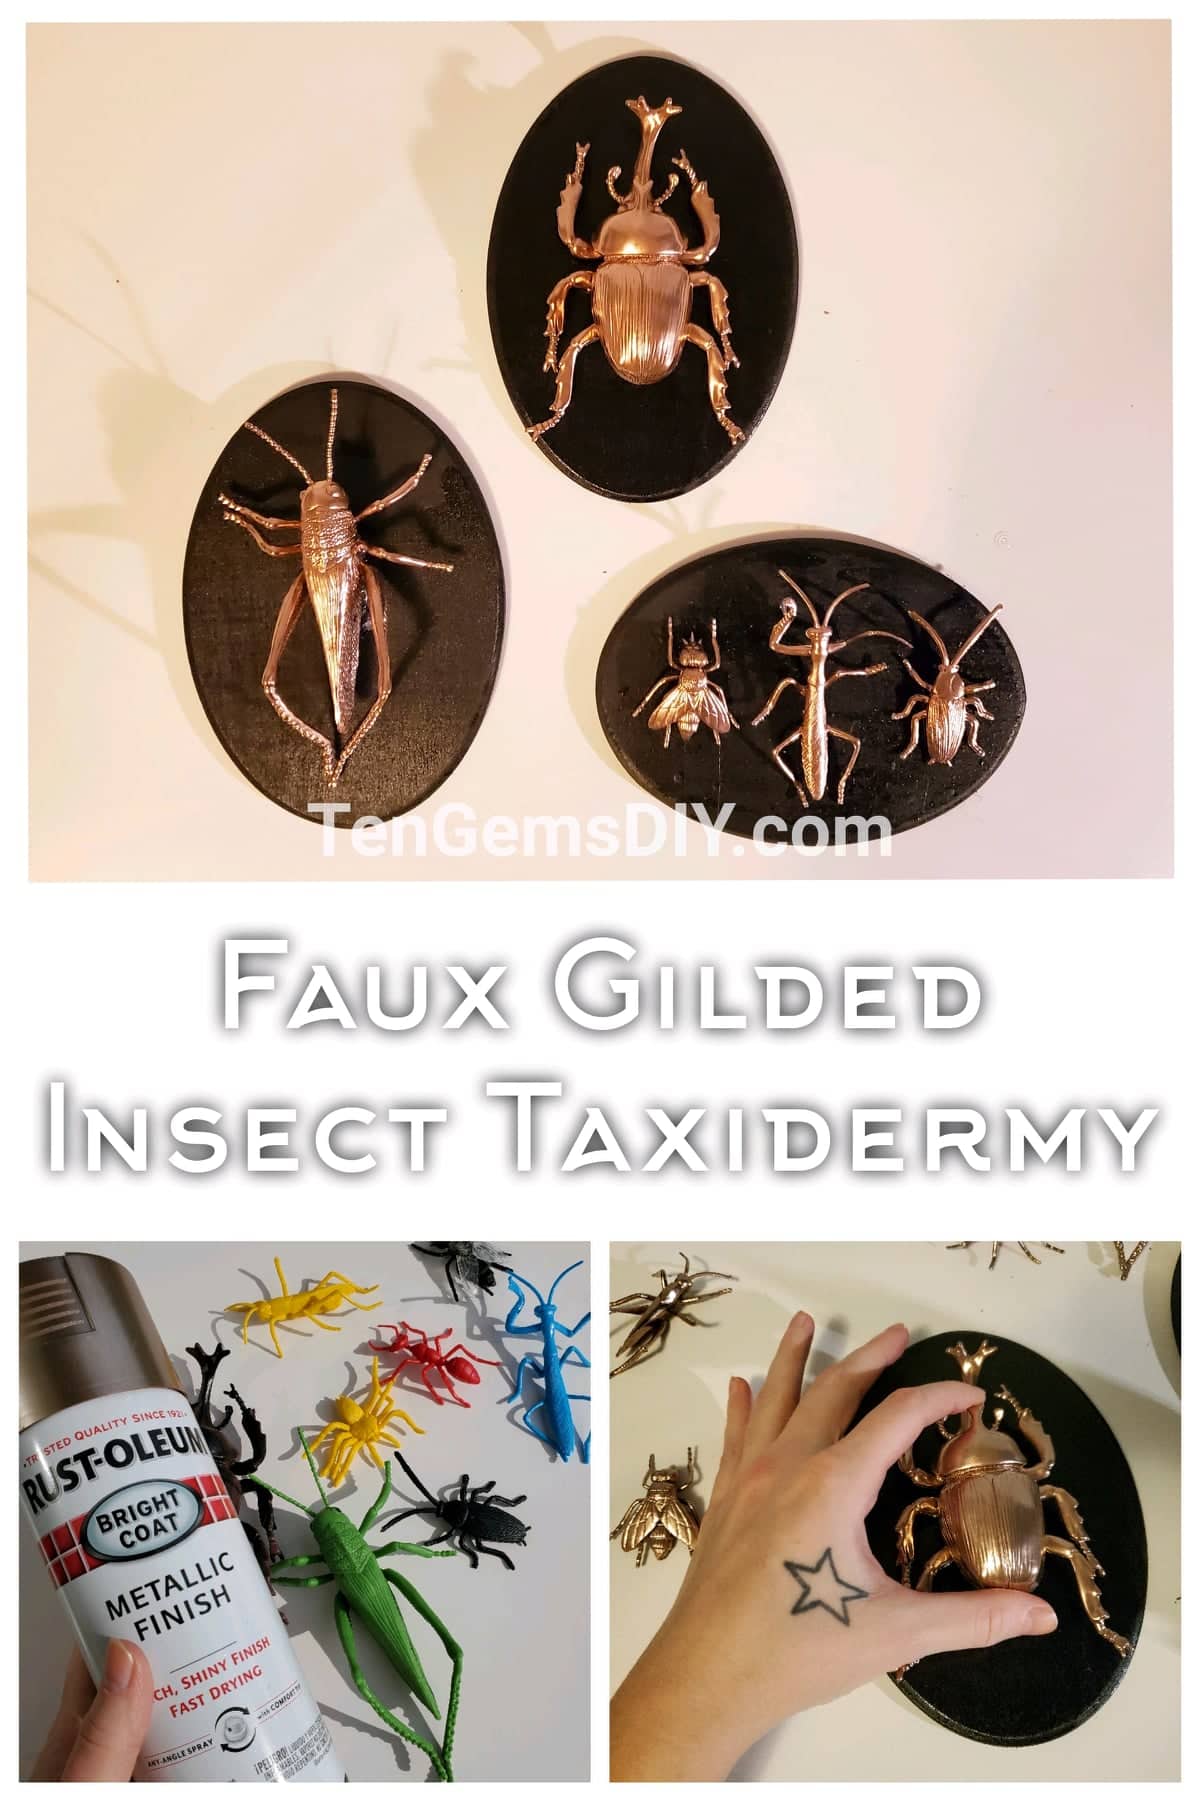 Faux Gilded Insect Taxidermy, DIY halloween decorations, easy halloween crafts, insect crafts, insect taxidermy, insect taxidermy art, halloween insect decorations, halloween insect art, halloween bug decor, faux taxidermy insects, diy spooky decor, trending crafts, apothecary crafts, spooky crafts for adults, diy halloween wall decor, goth wall decor,